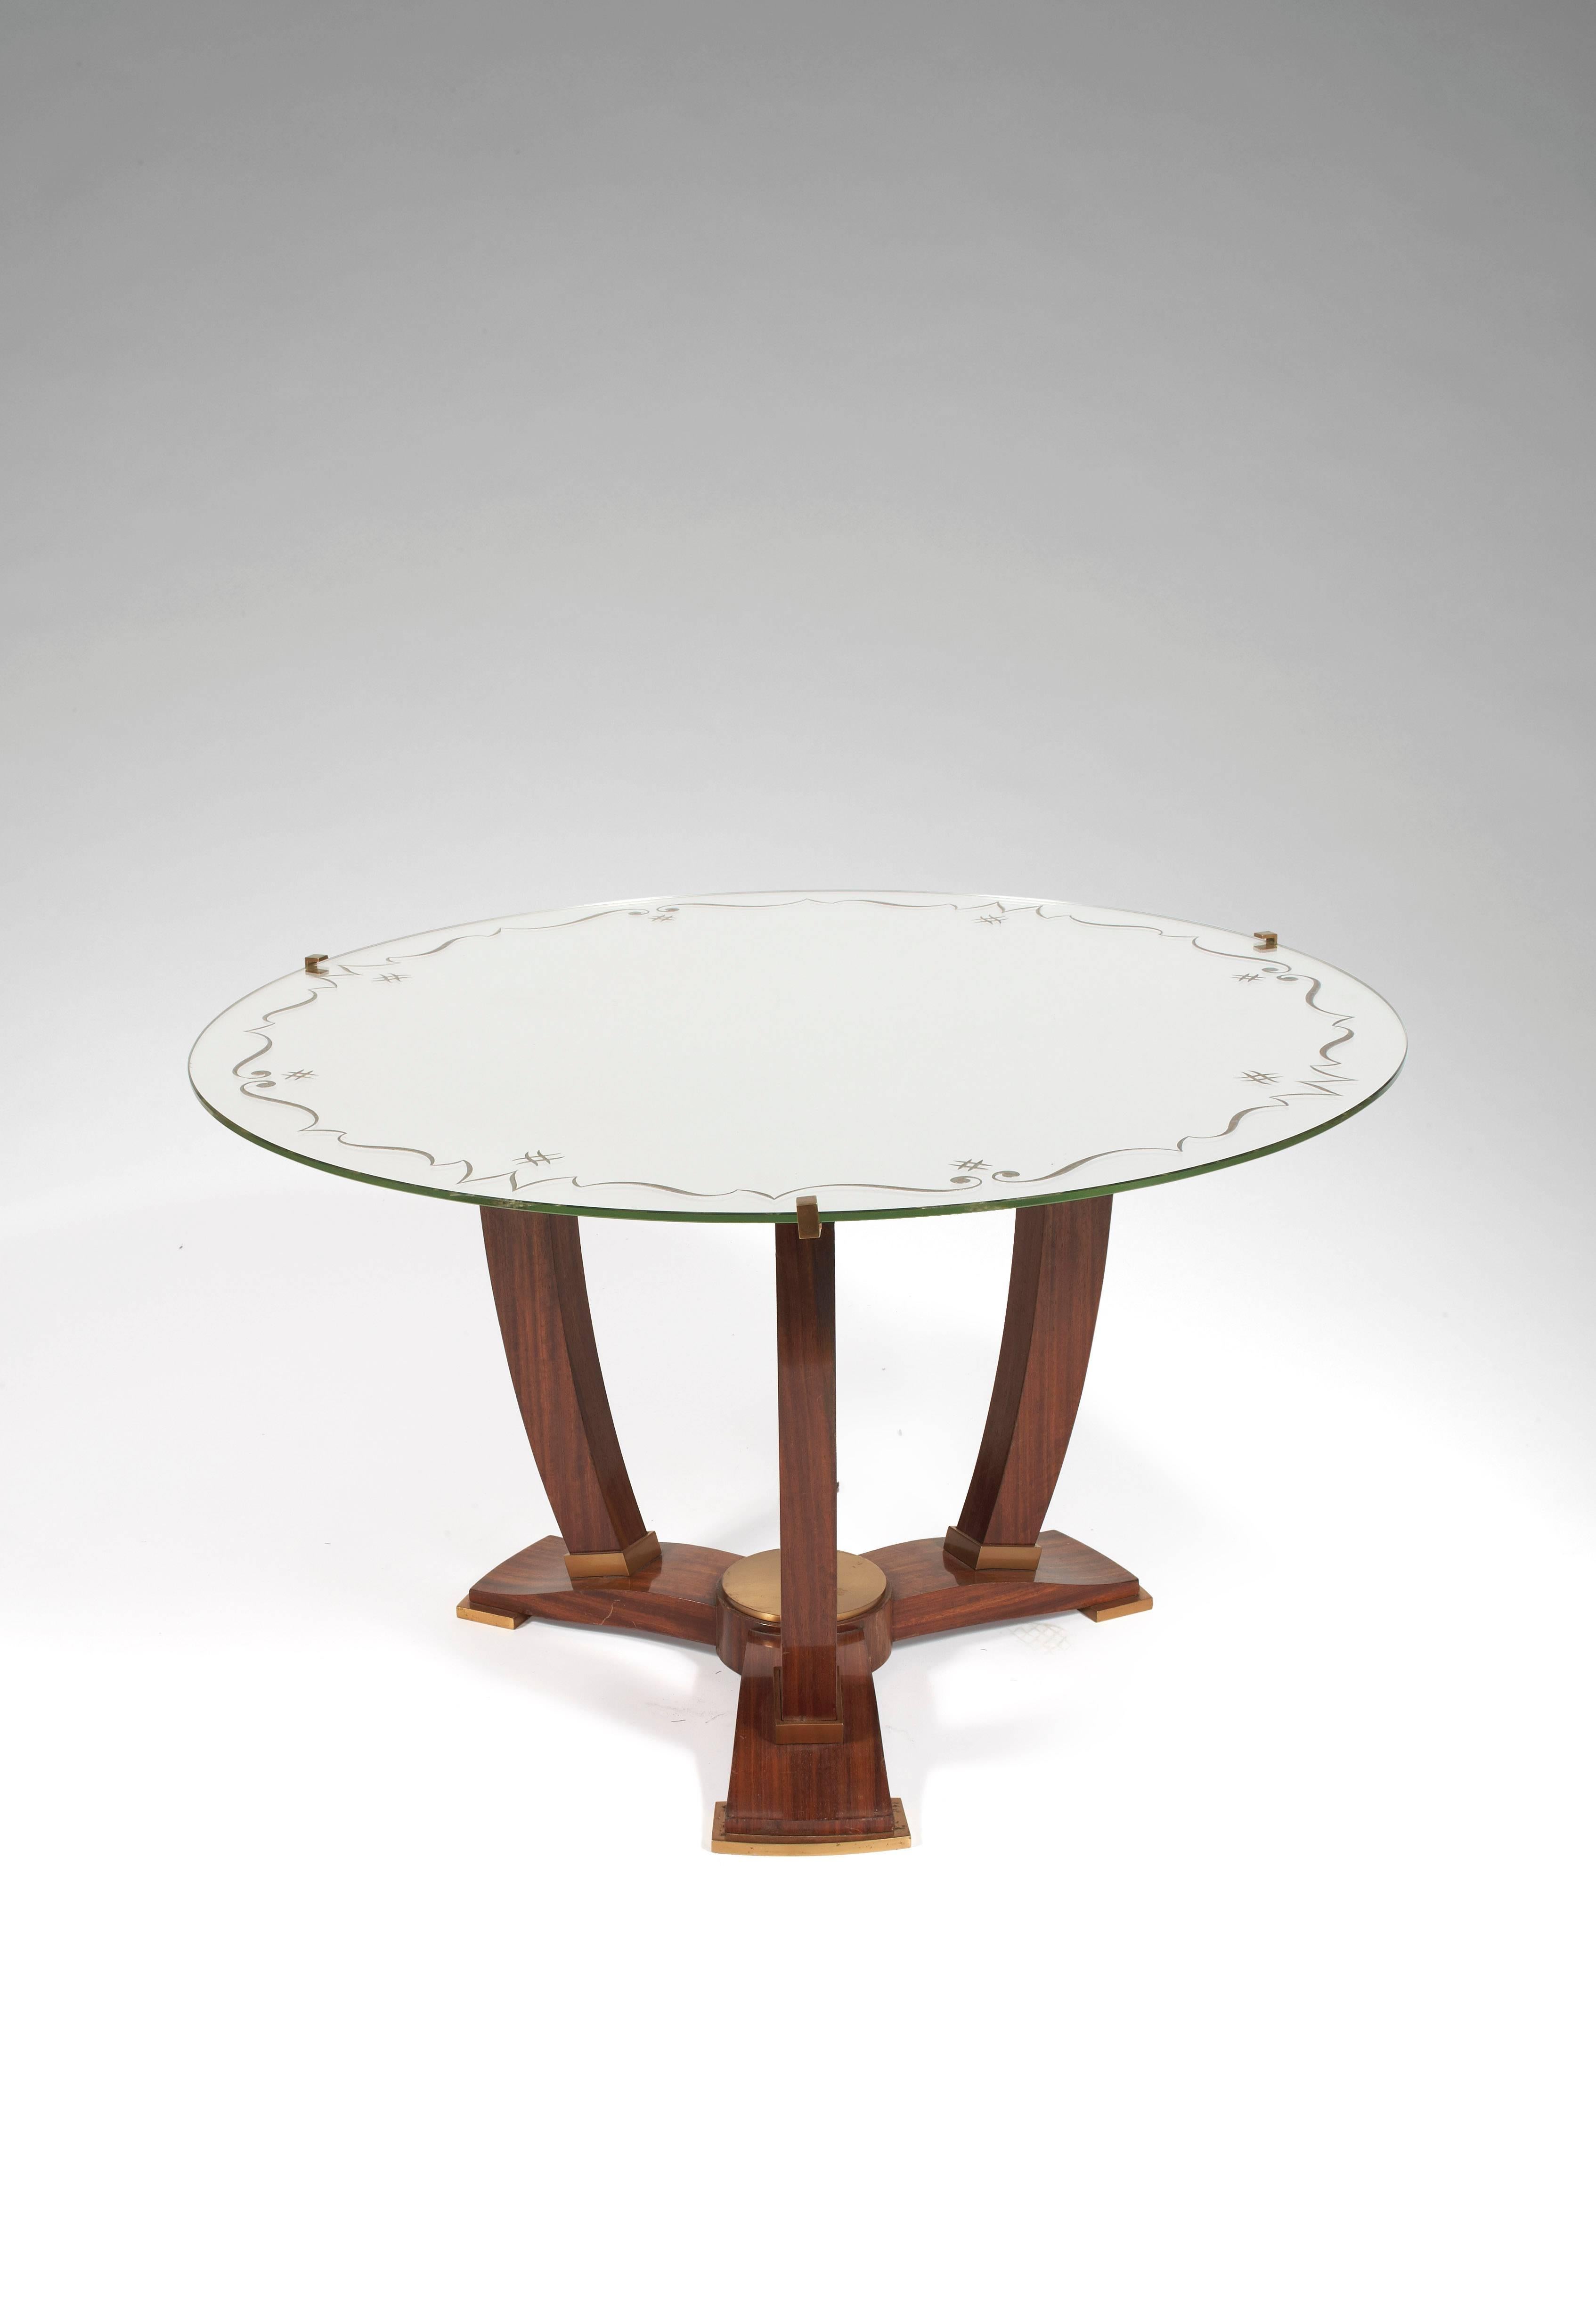 Elegant pedestal table in mahogany and gilded bronze. Plate mirror with floral decoration, circa 1935.